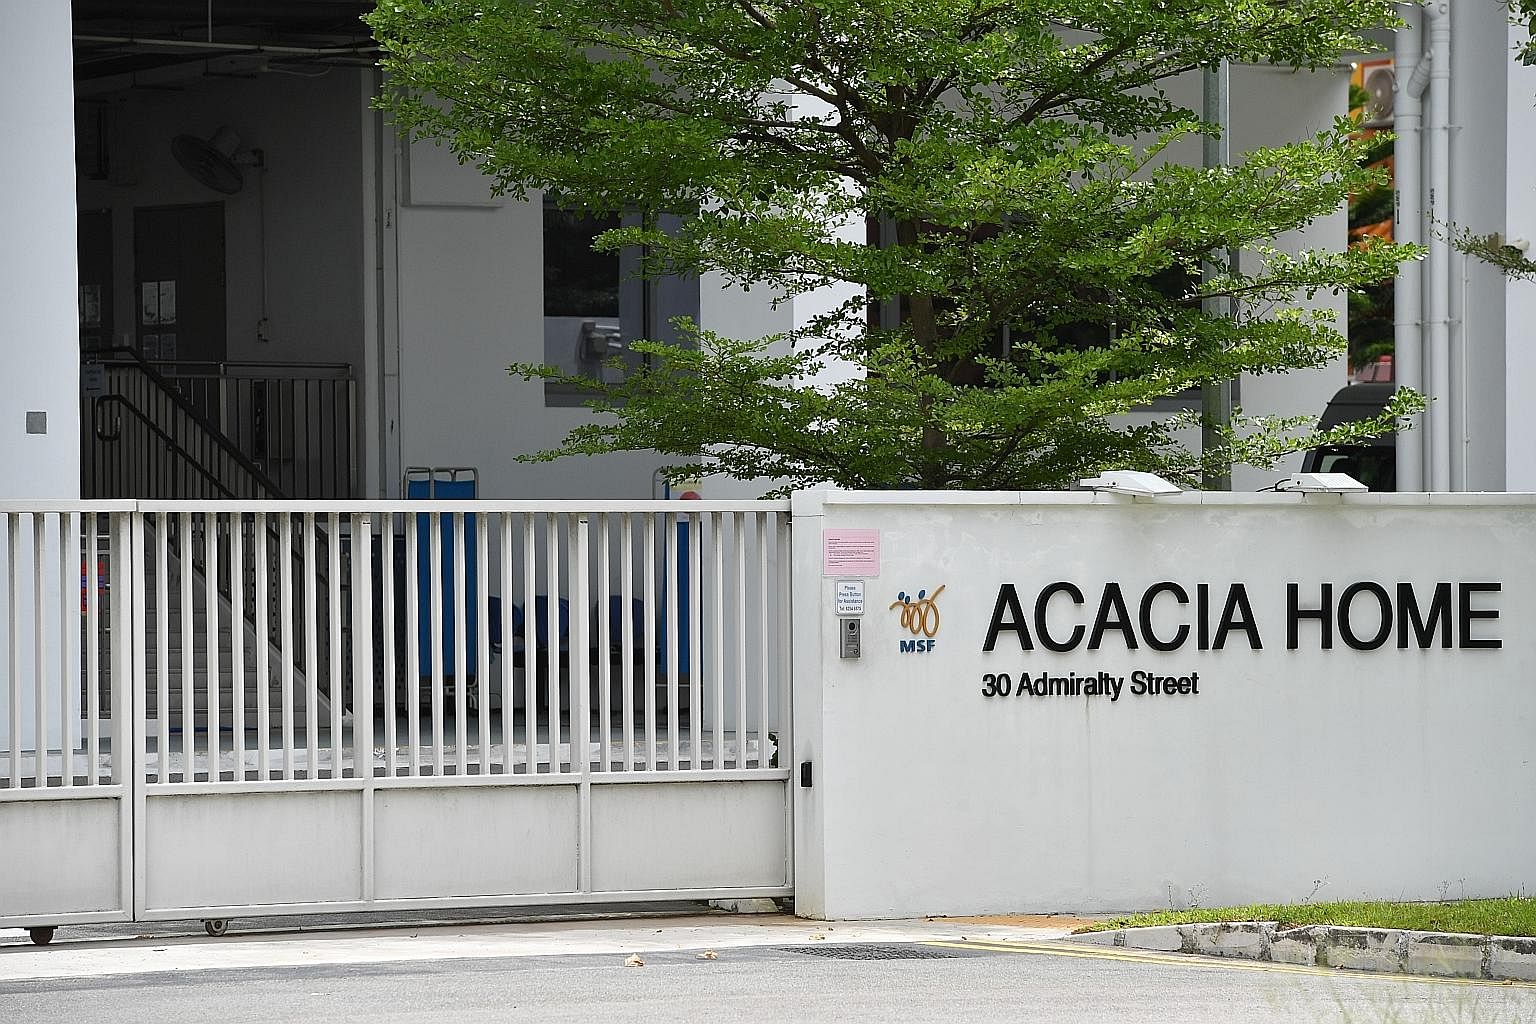 Twelve more residents and two employees at Acacia Home were found to have Covid-19, after a resident was diagnosed earlier. ST PHOTO: CHONG JUN LIANG